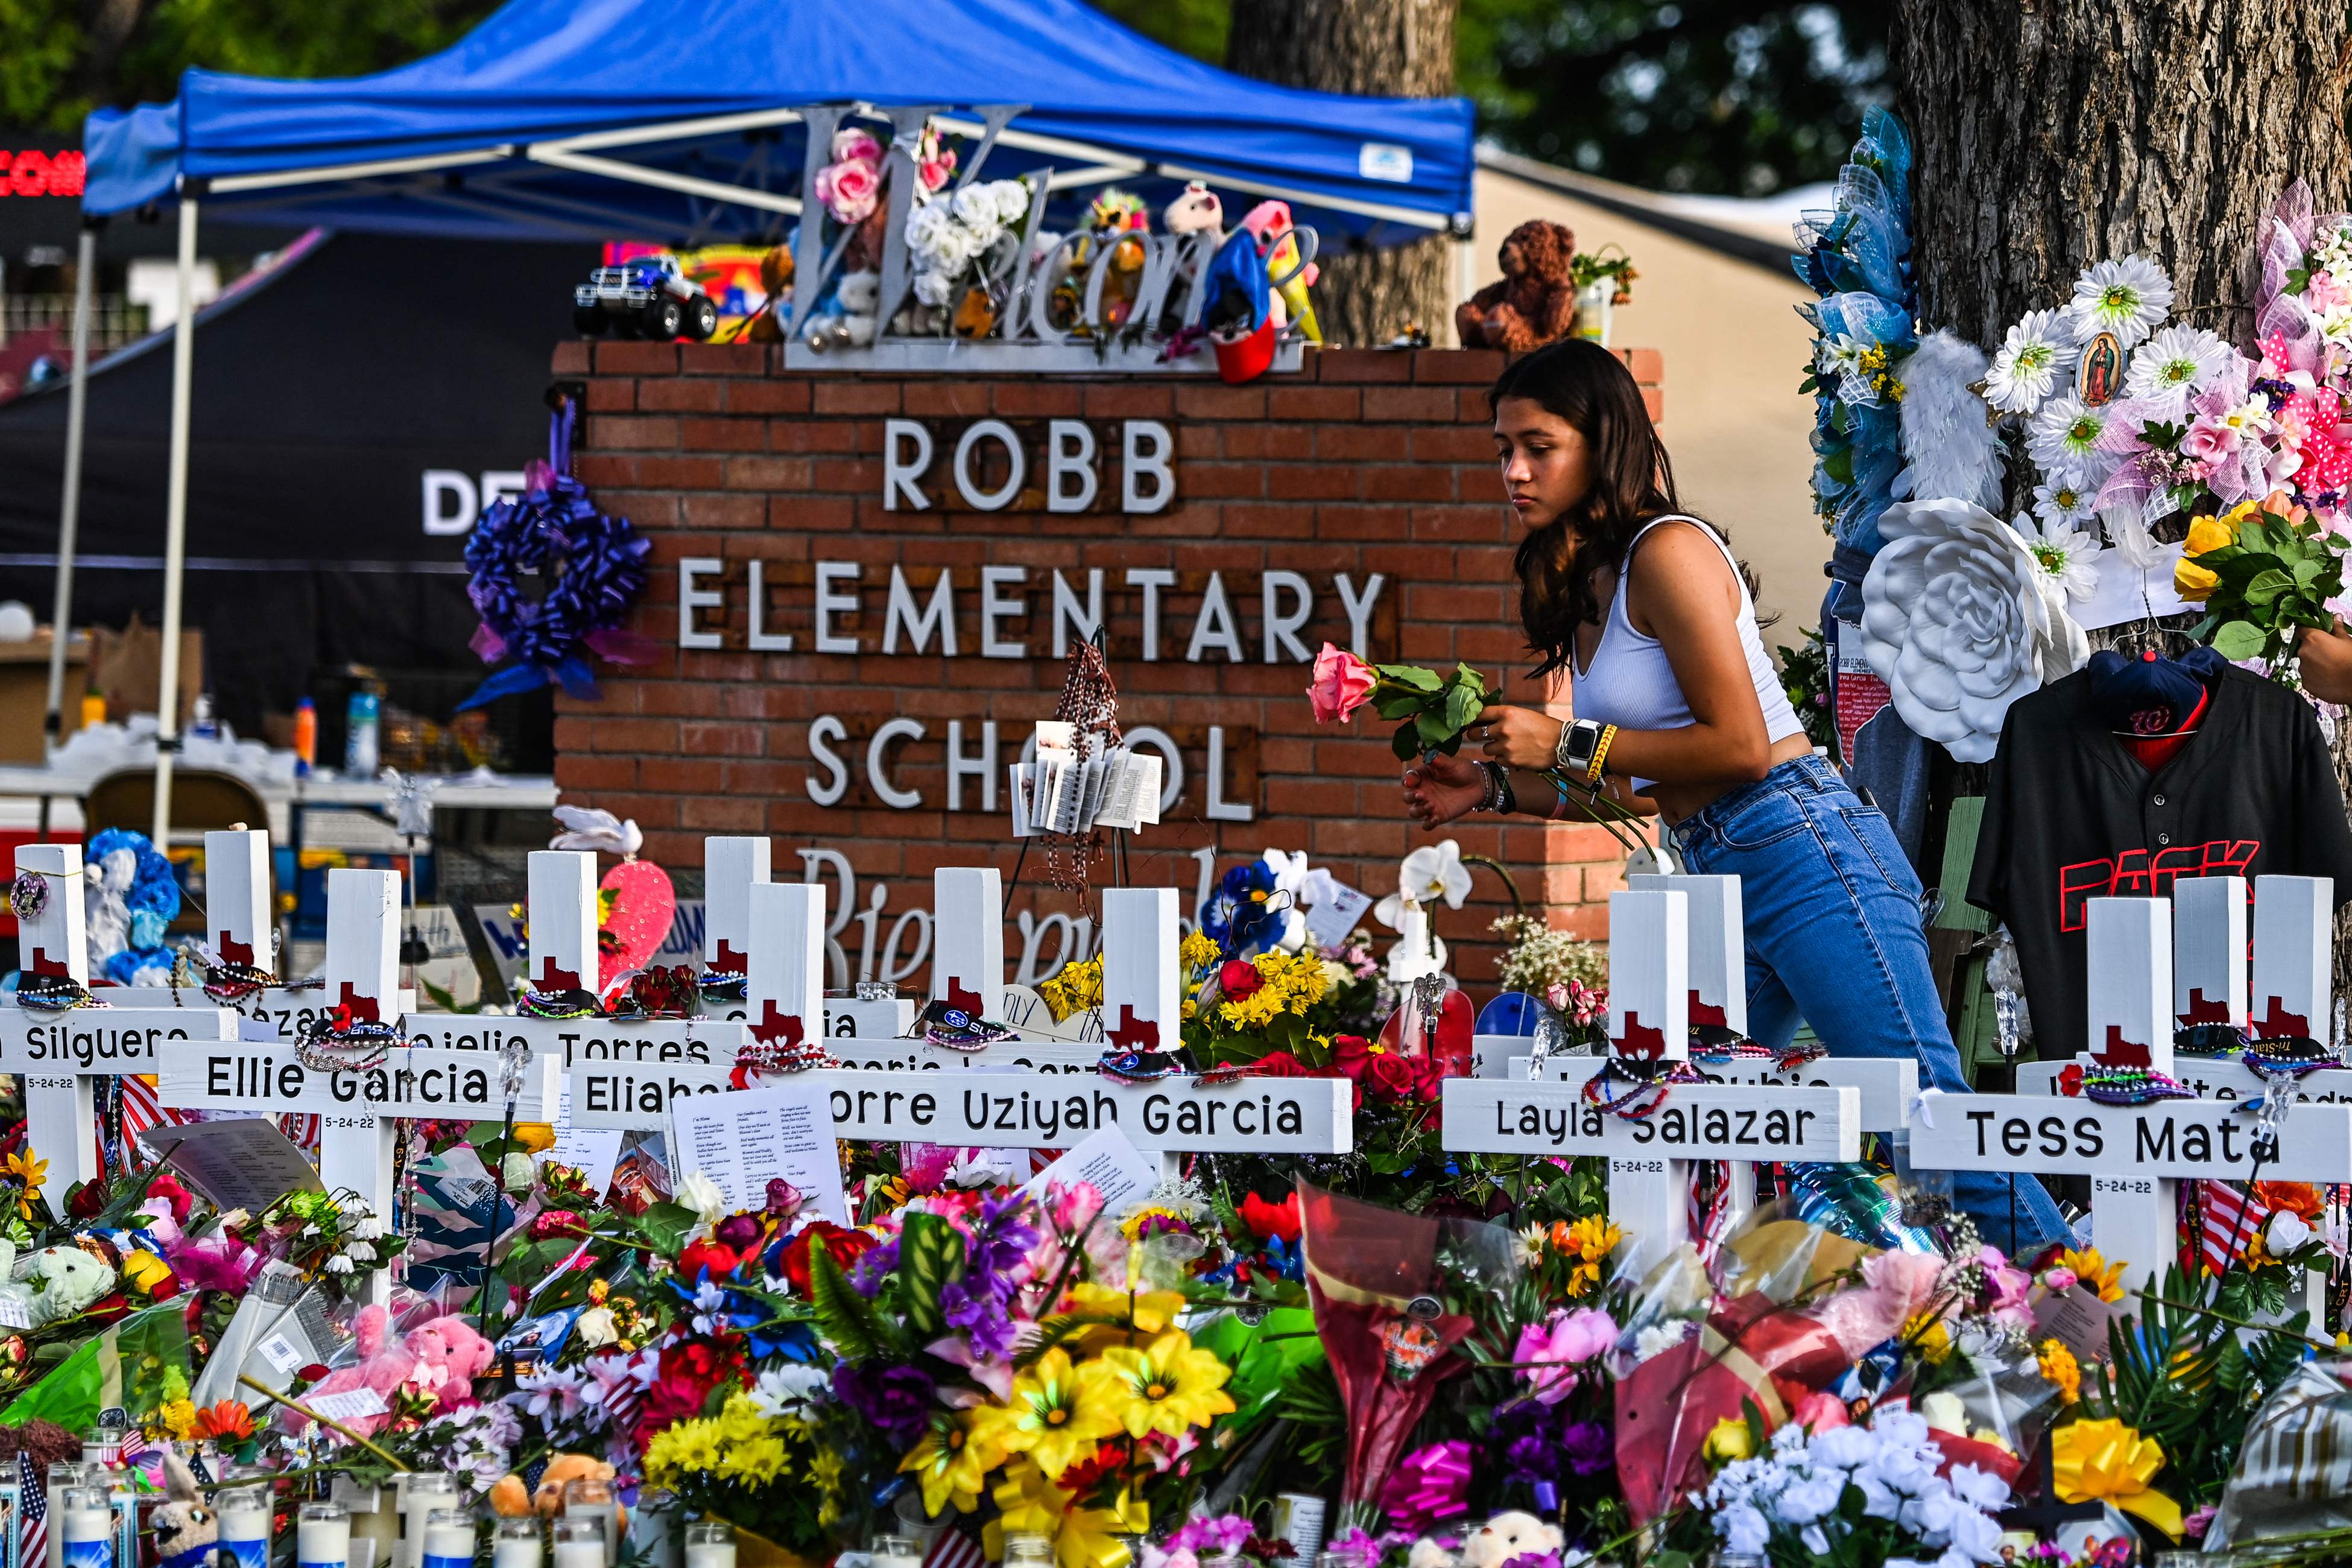 This horrific event was the second worst school shooting in US history